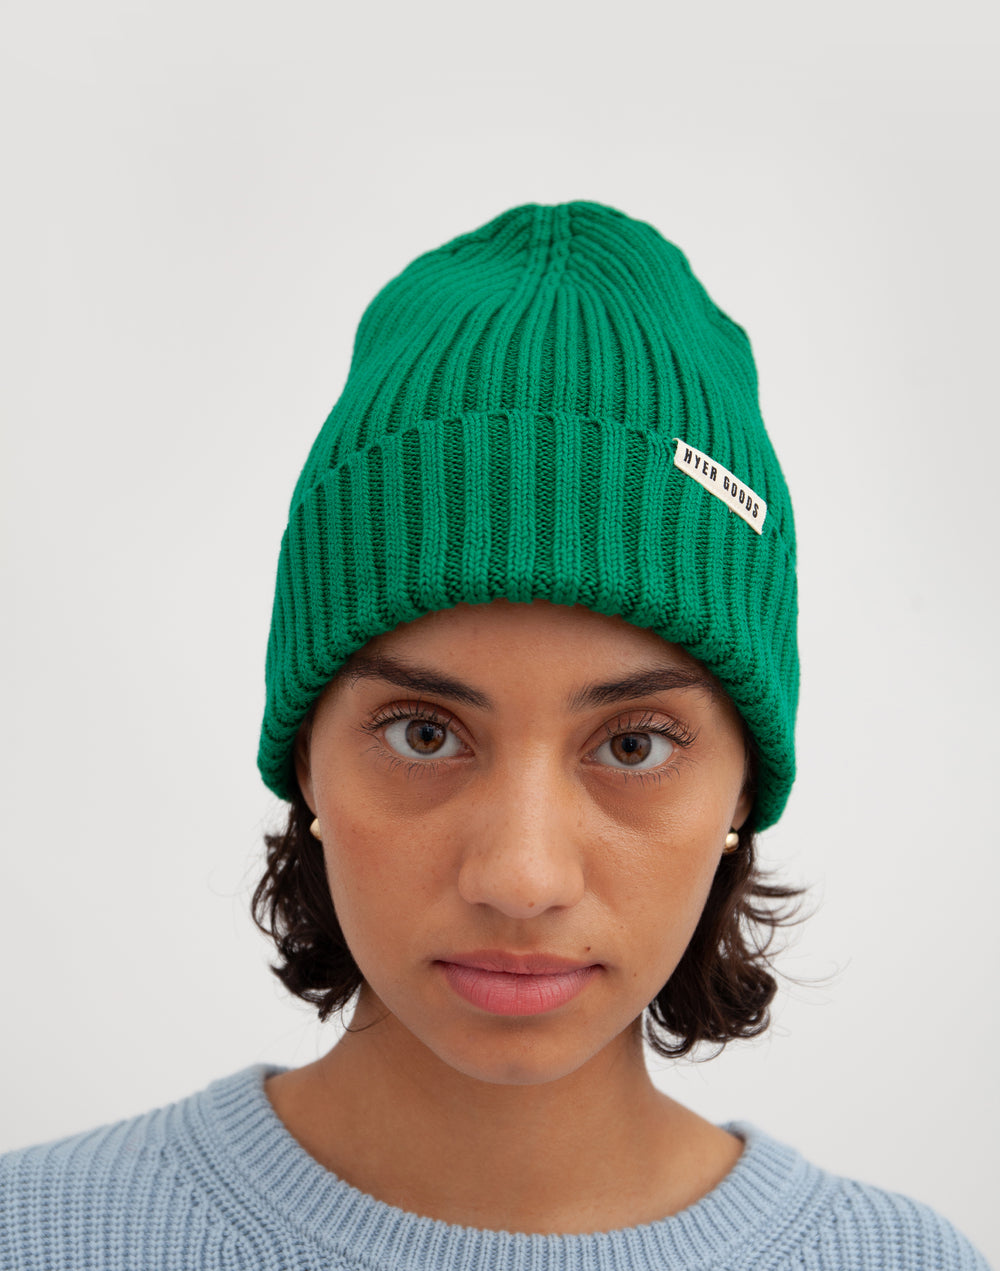 a headshot of a girl wearing a light blue sweater and a green beanie